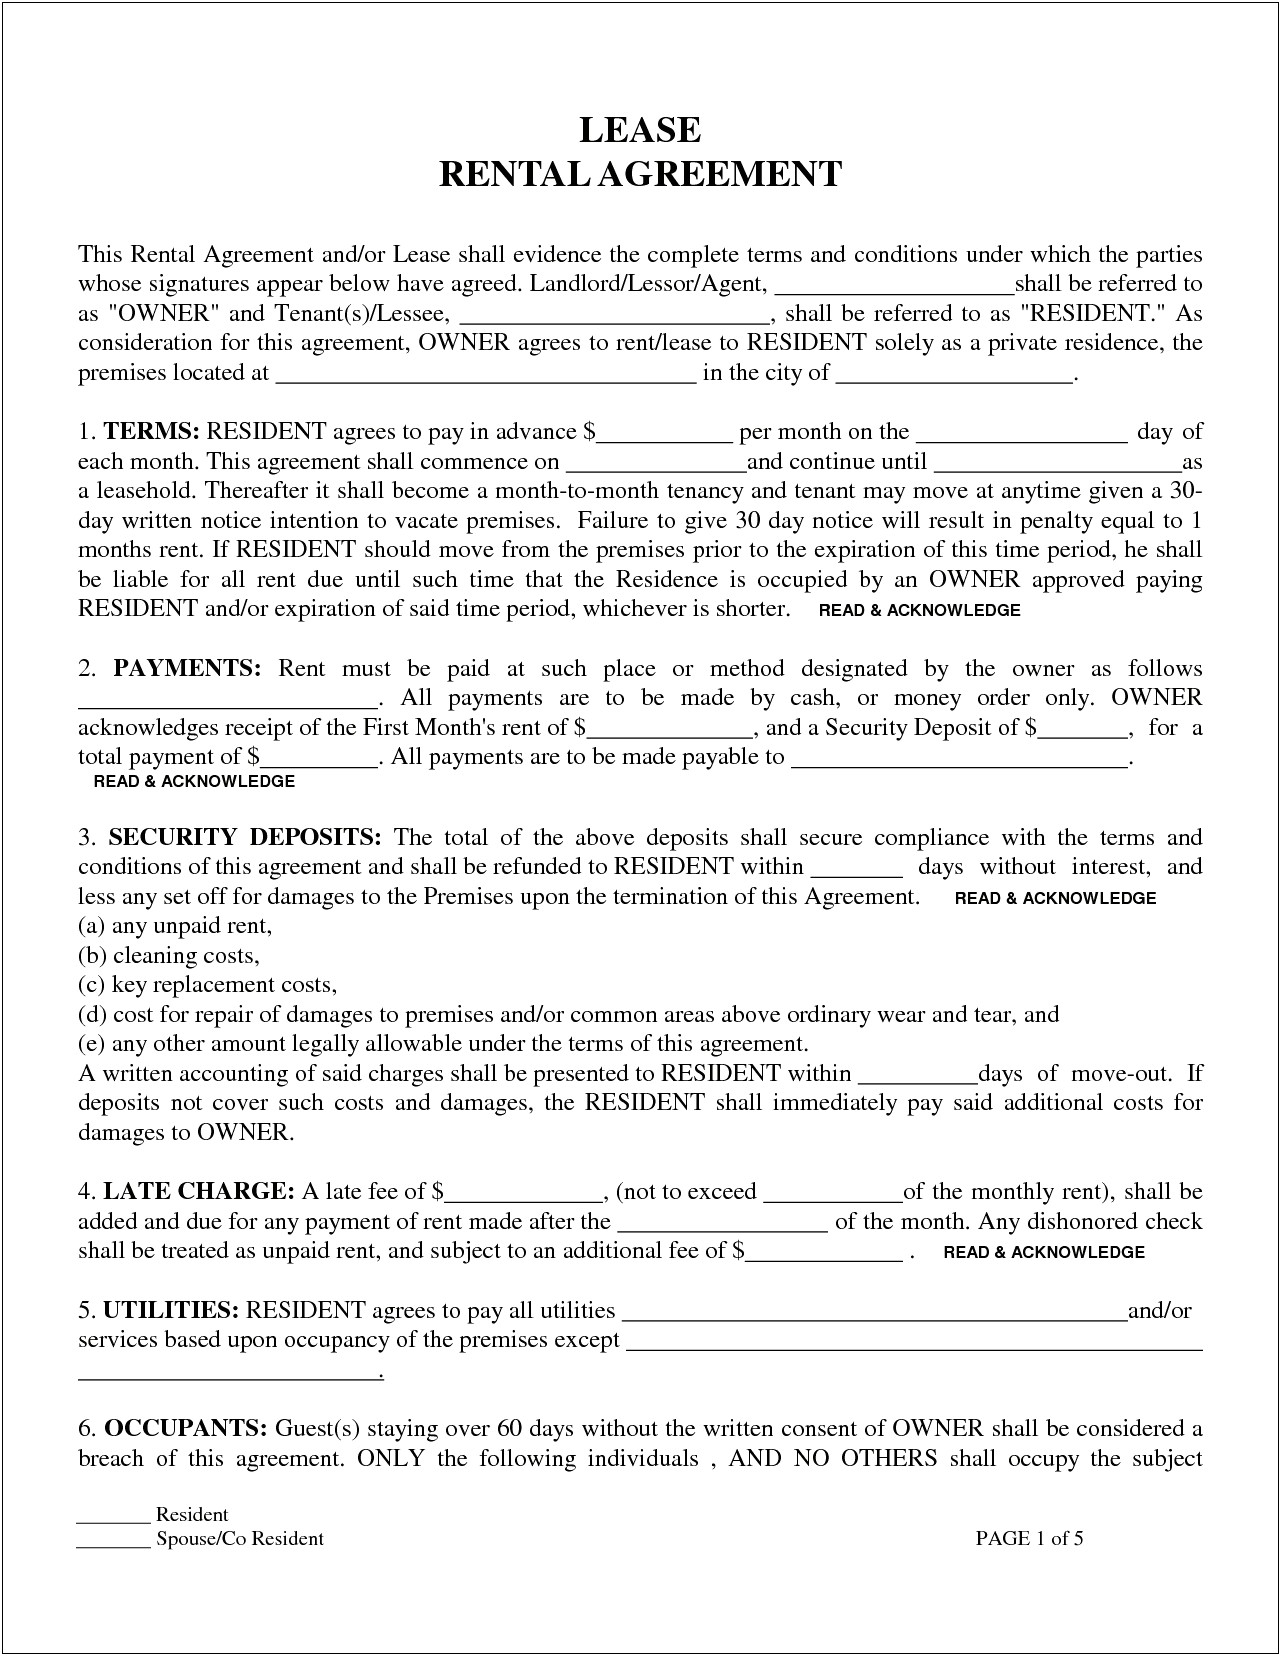 Free Commercial Property Rental Agreement Template